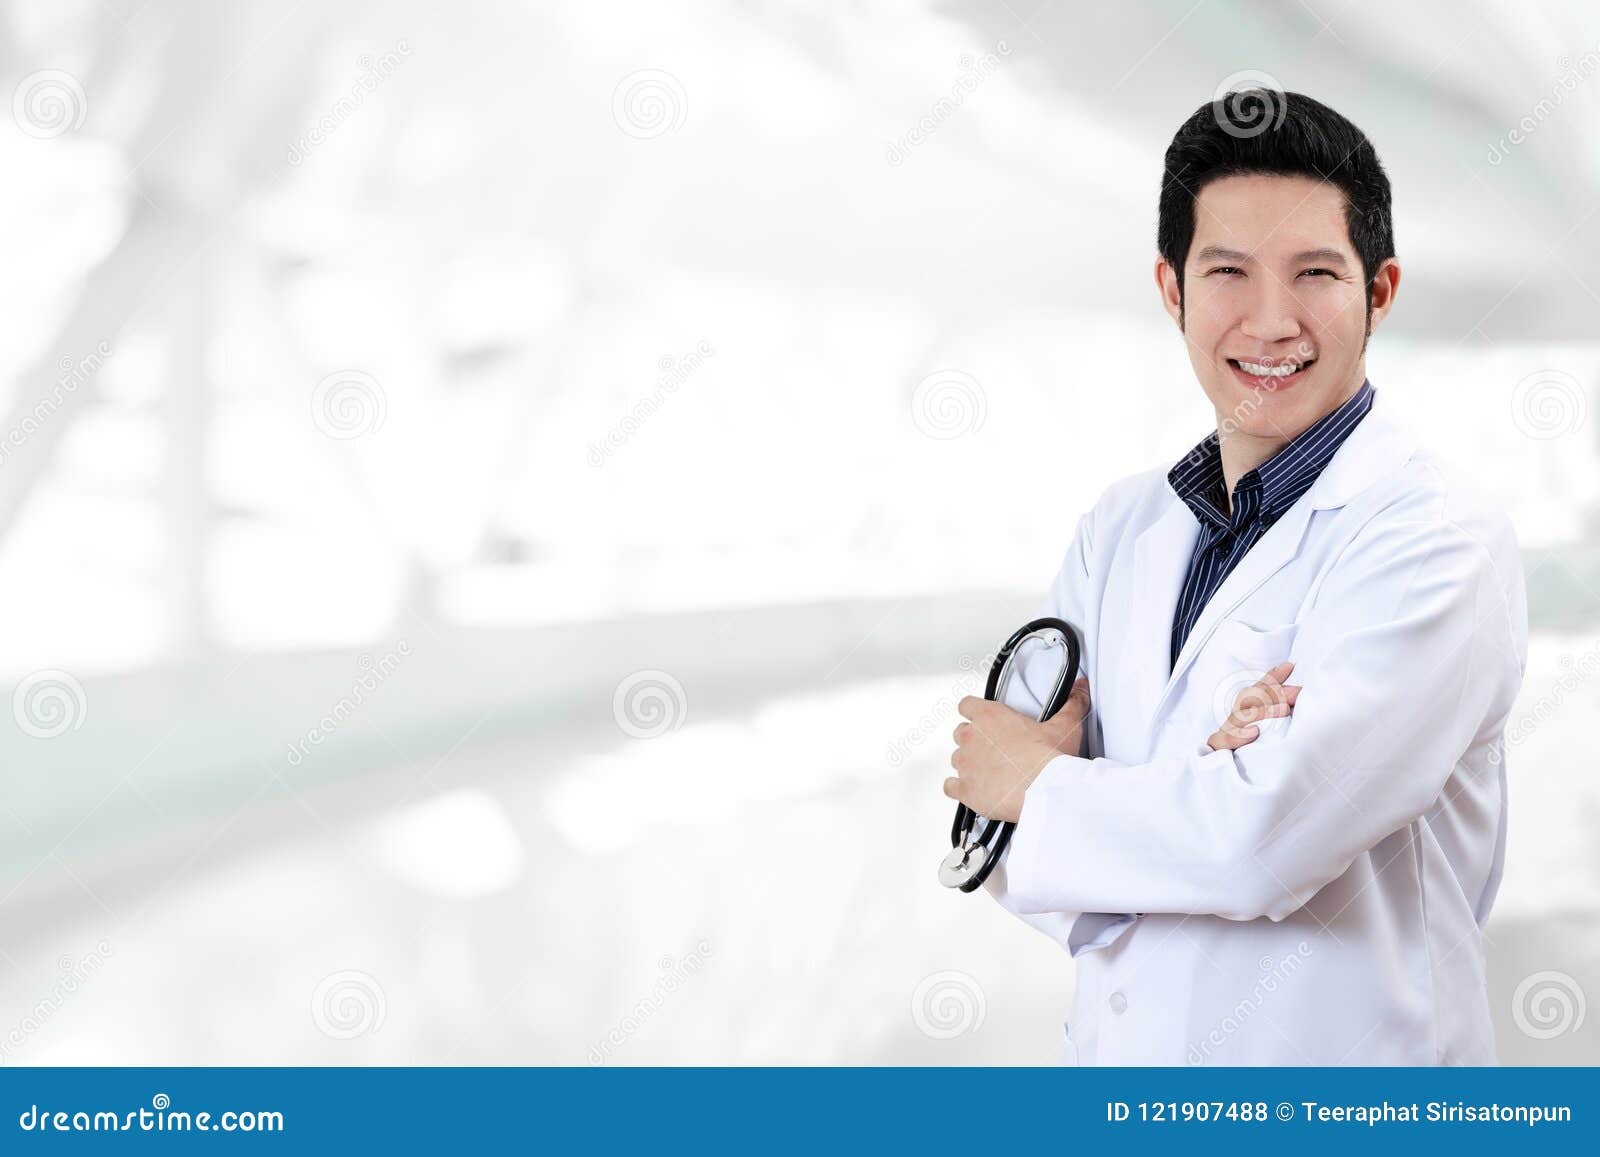 portrait of young attractive asian doctor or physician man crossed arms holding stethoscope medical equipment